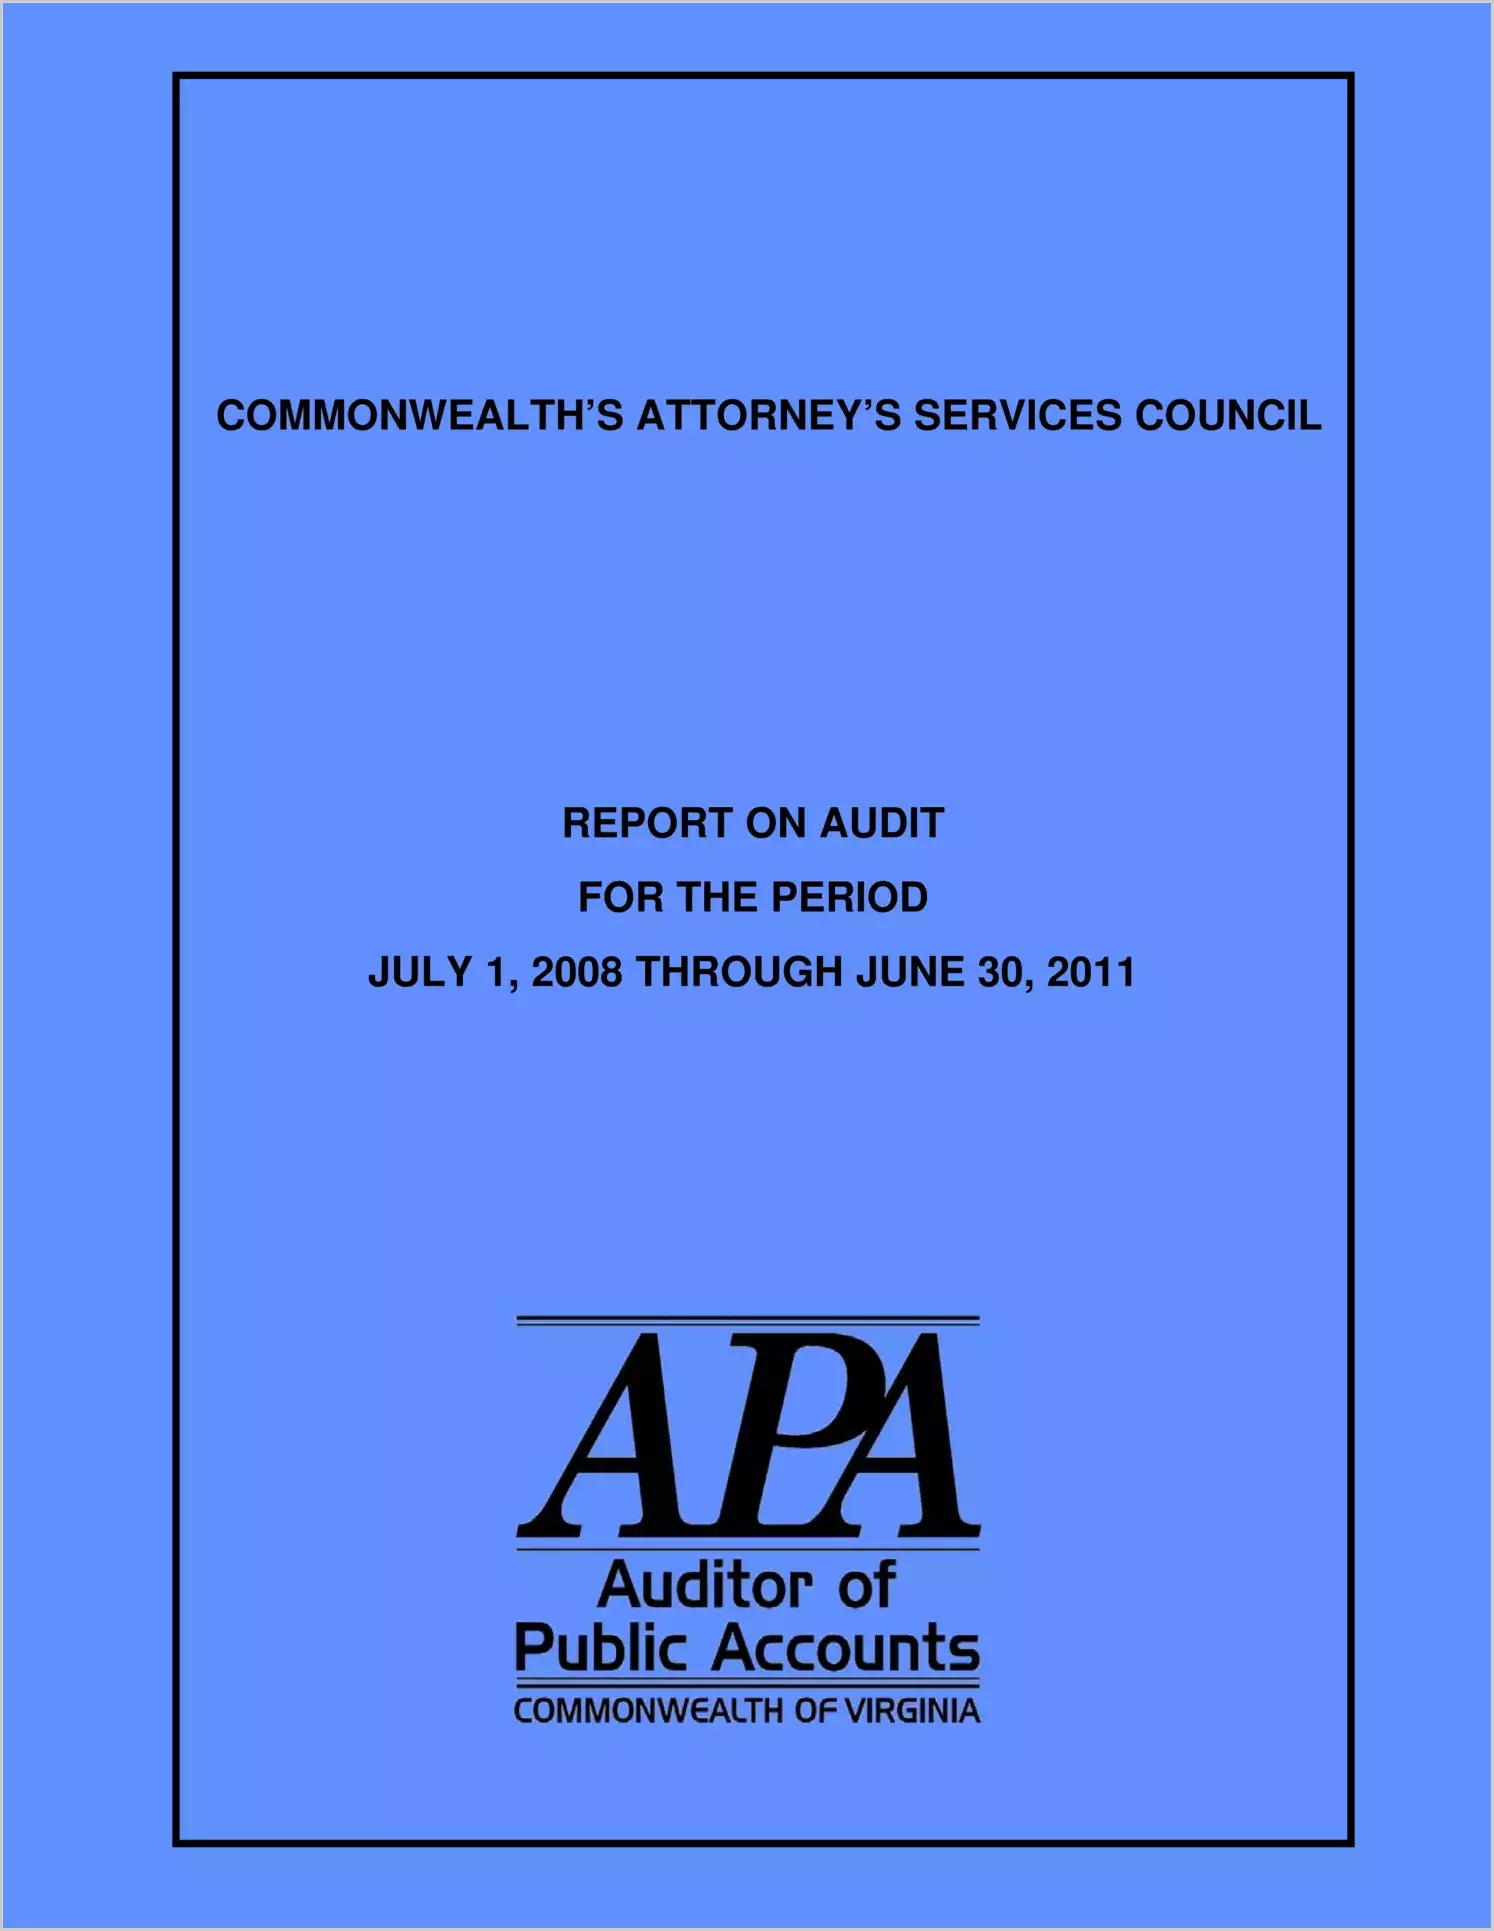 Commonwealth Attorneys` Services Council for the period July 1, 2008 through June 30, 2011